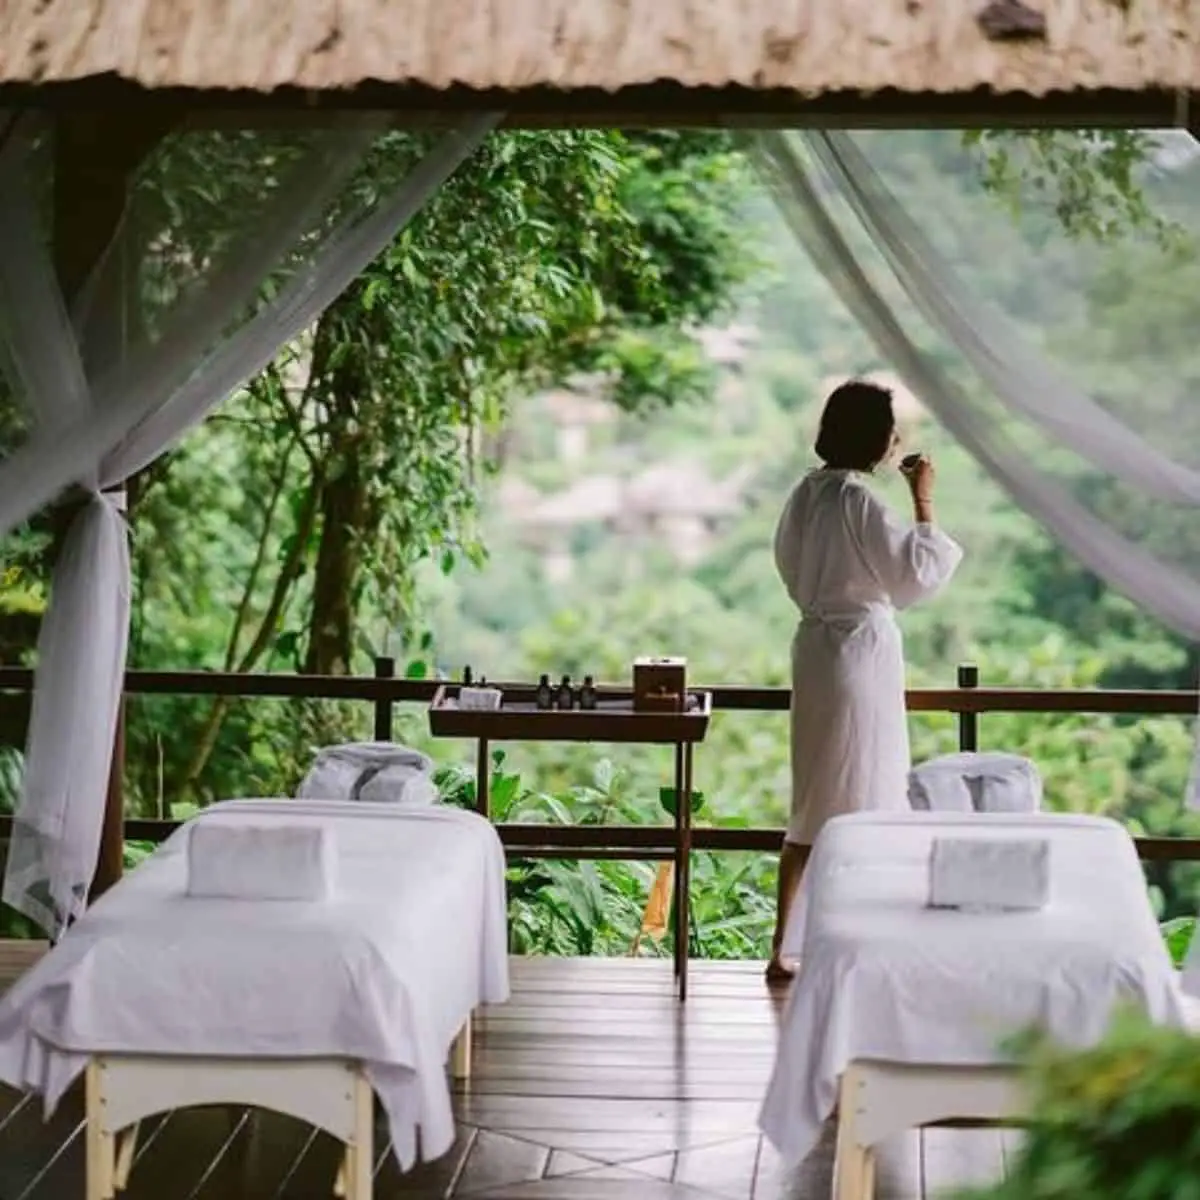 The open spa area of Alila with white curtains and sheets with a short-haired woman in white robe